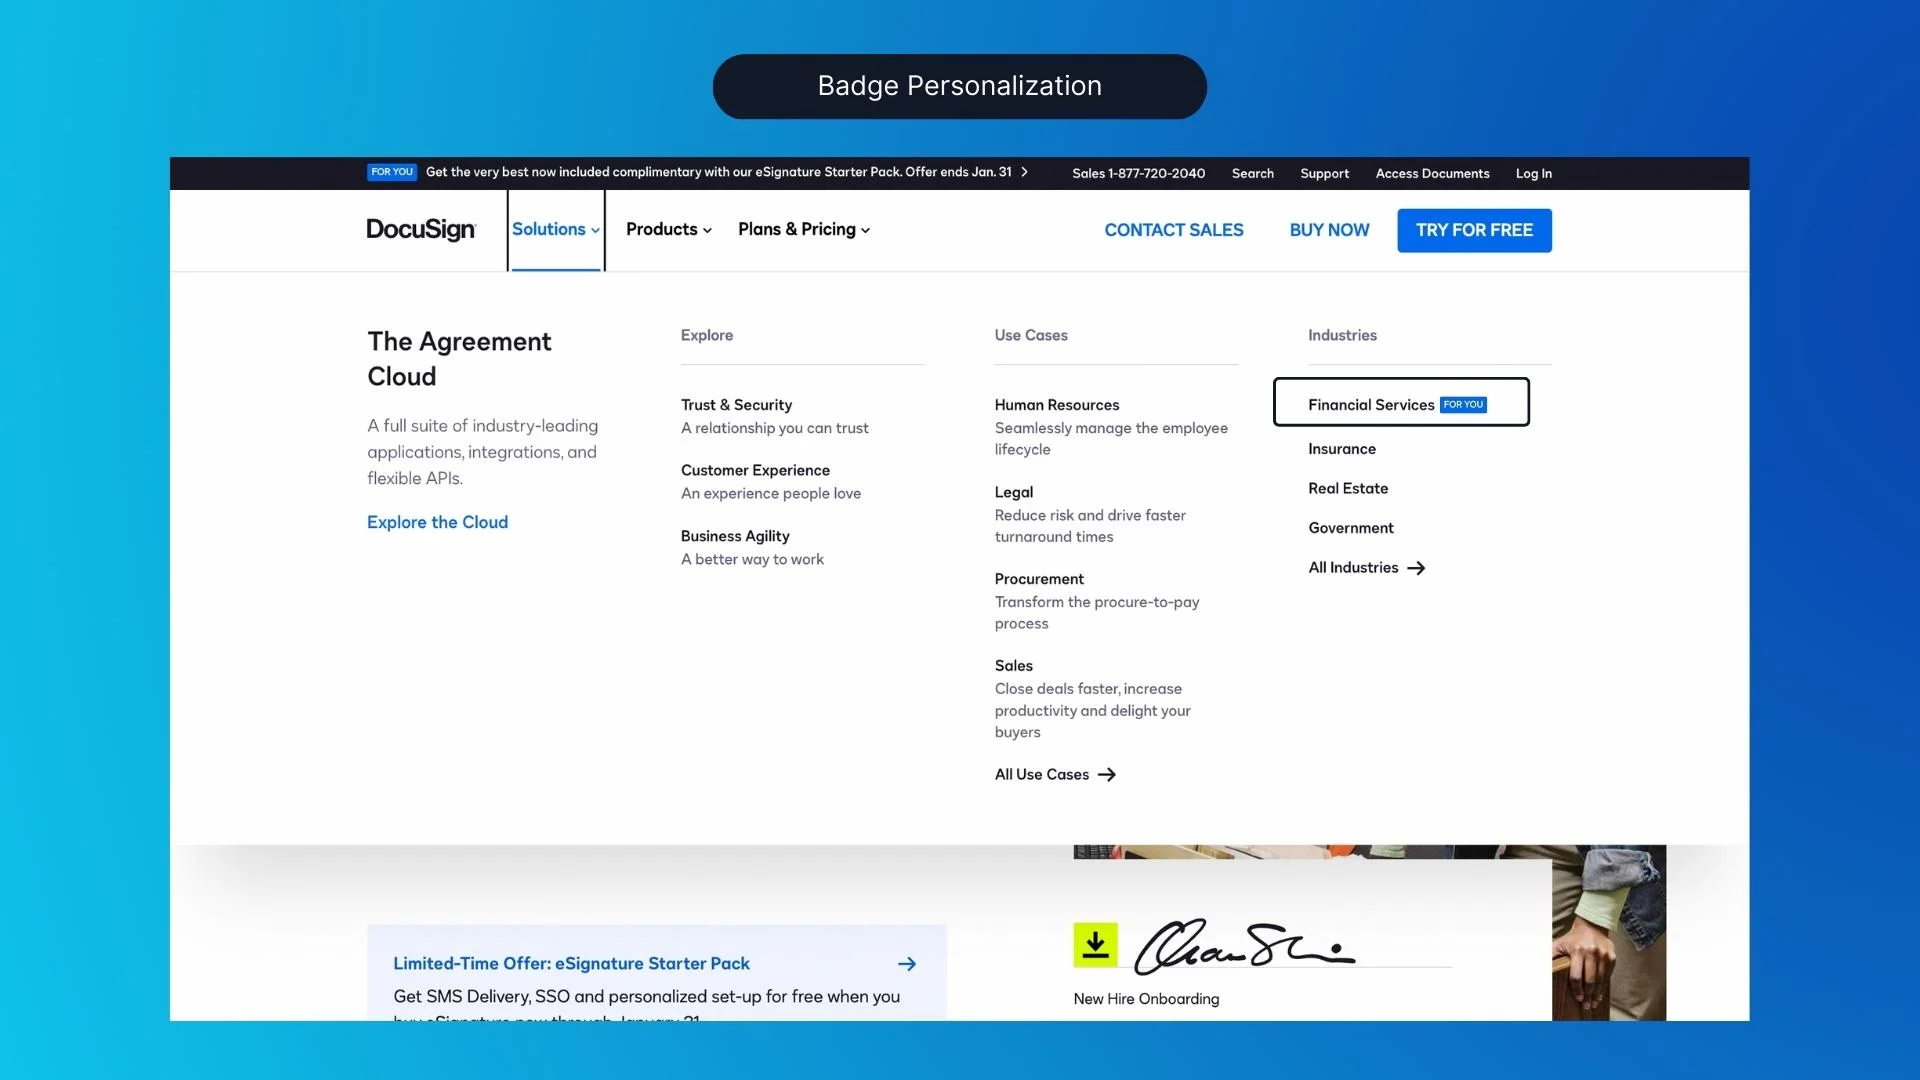 Badge Personalization Example (DocuSign) - After